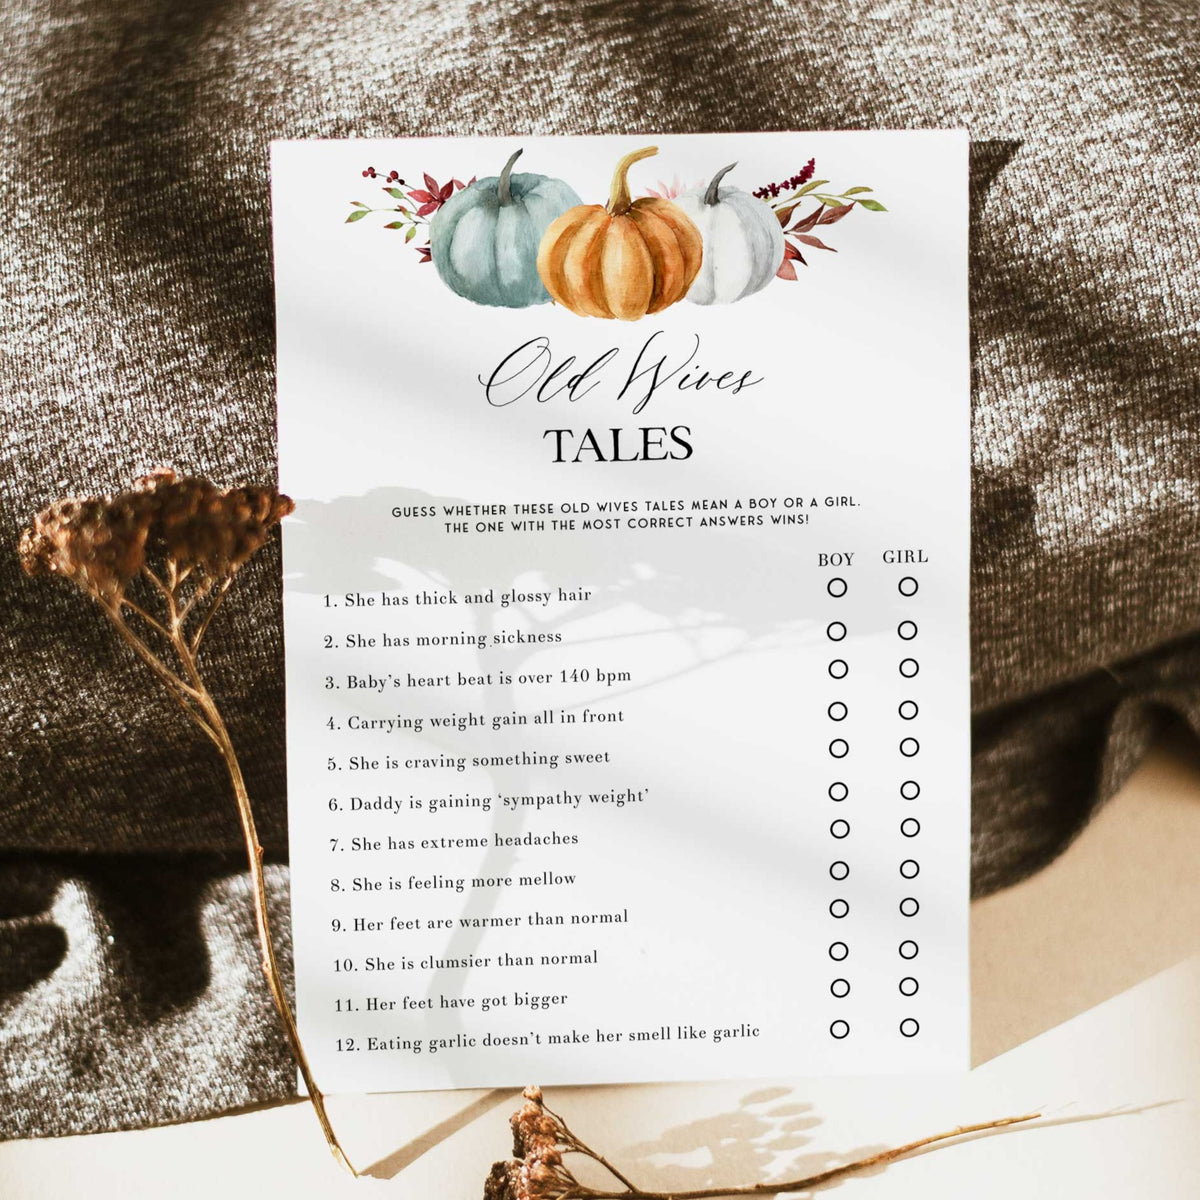 Fully editable and printable baby shower old wives tales game with a fall pumpkin design. Perfect for a Fall Pumpkin baby shower themed party